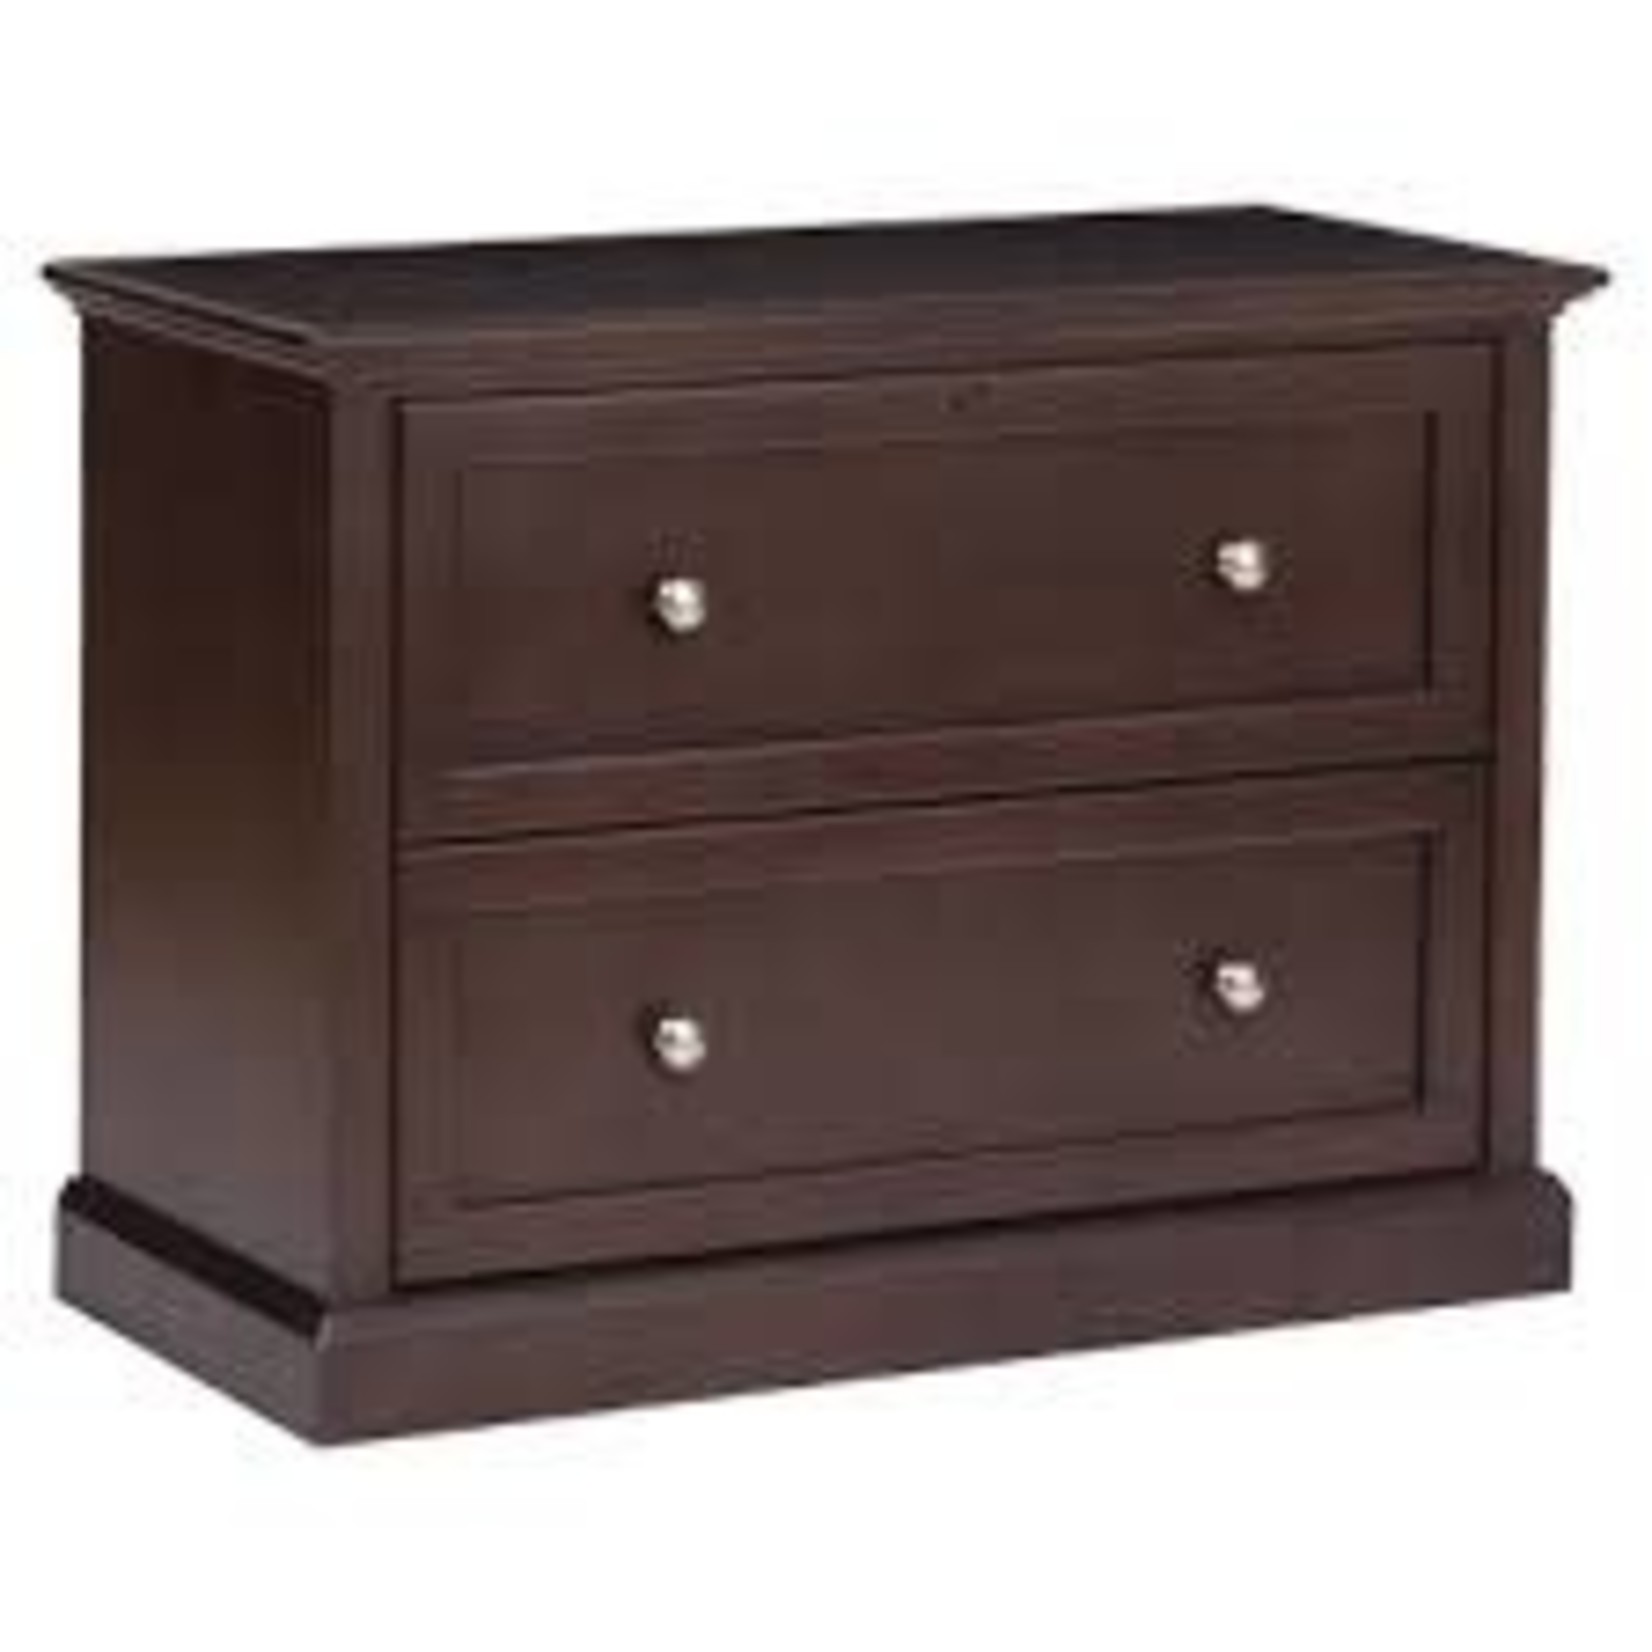 WHITTIER WOOD MCKENZIE LATERAL FILE CABINET